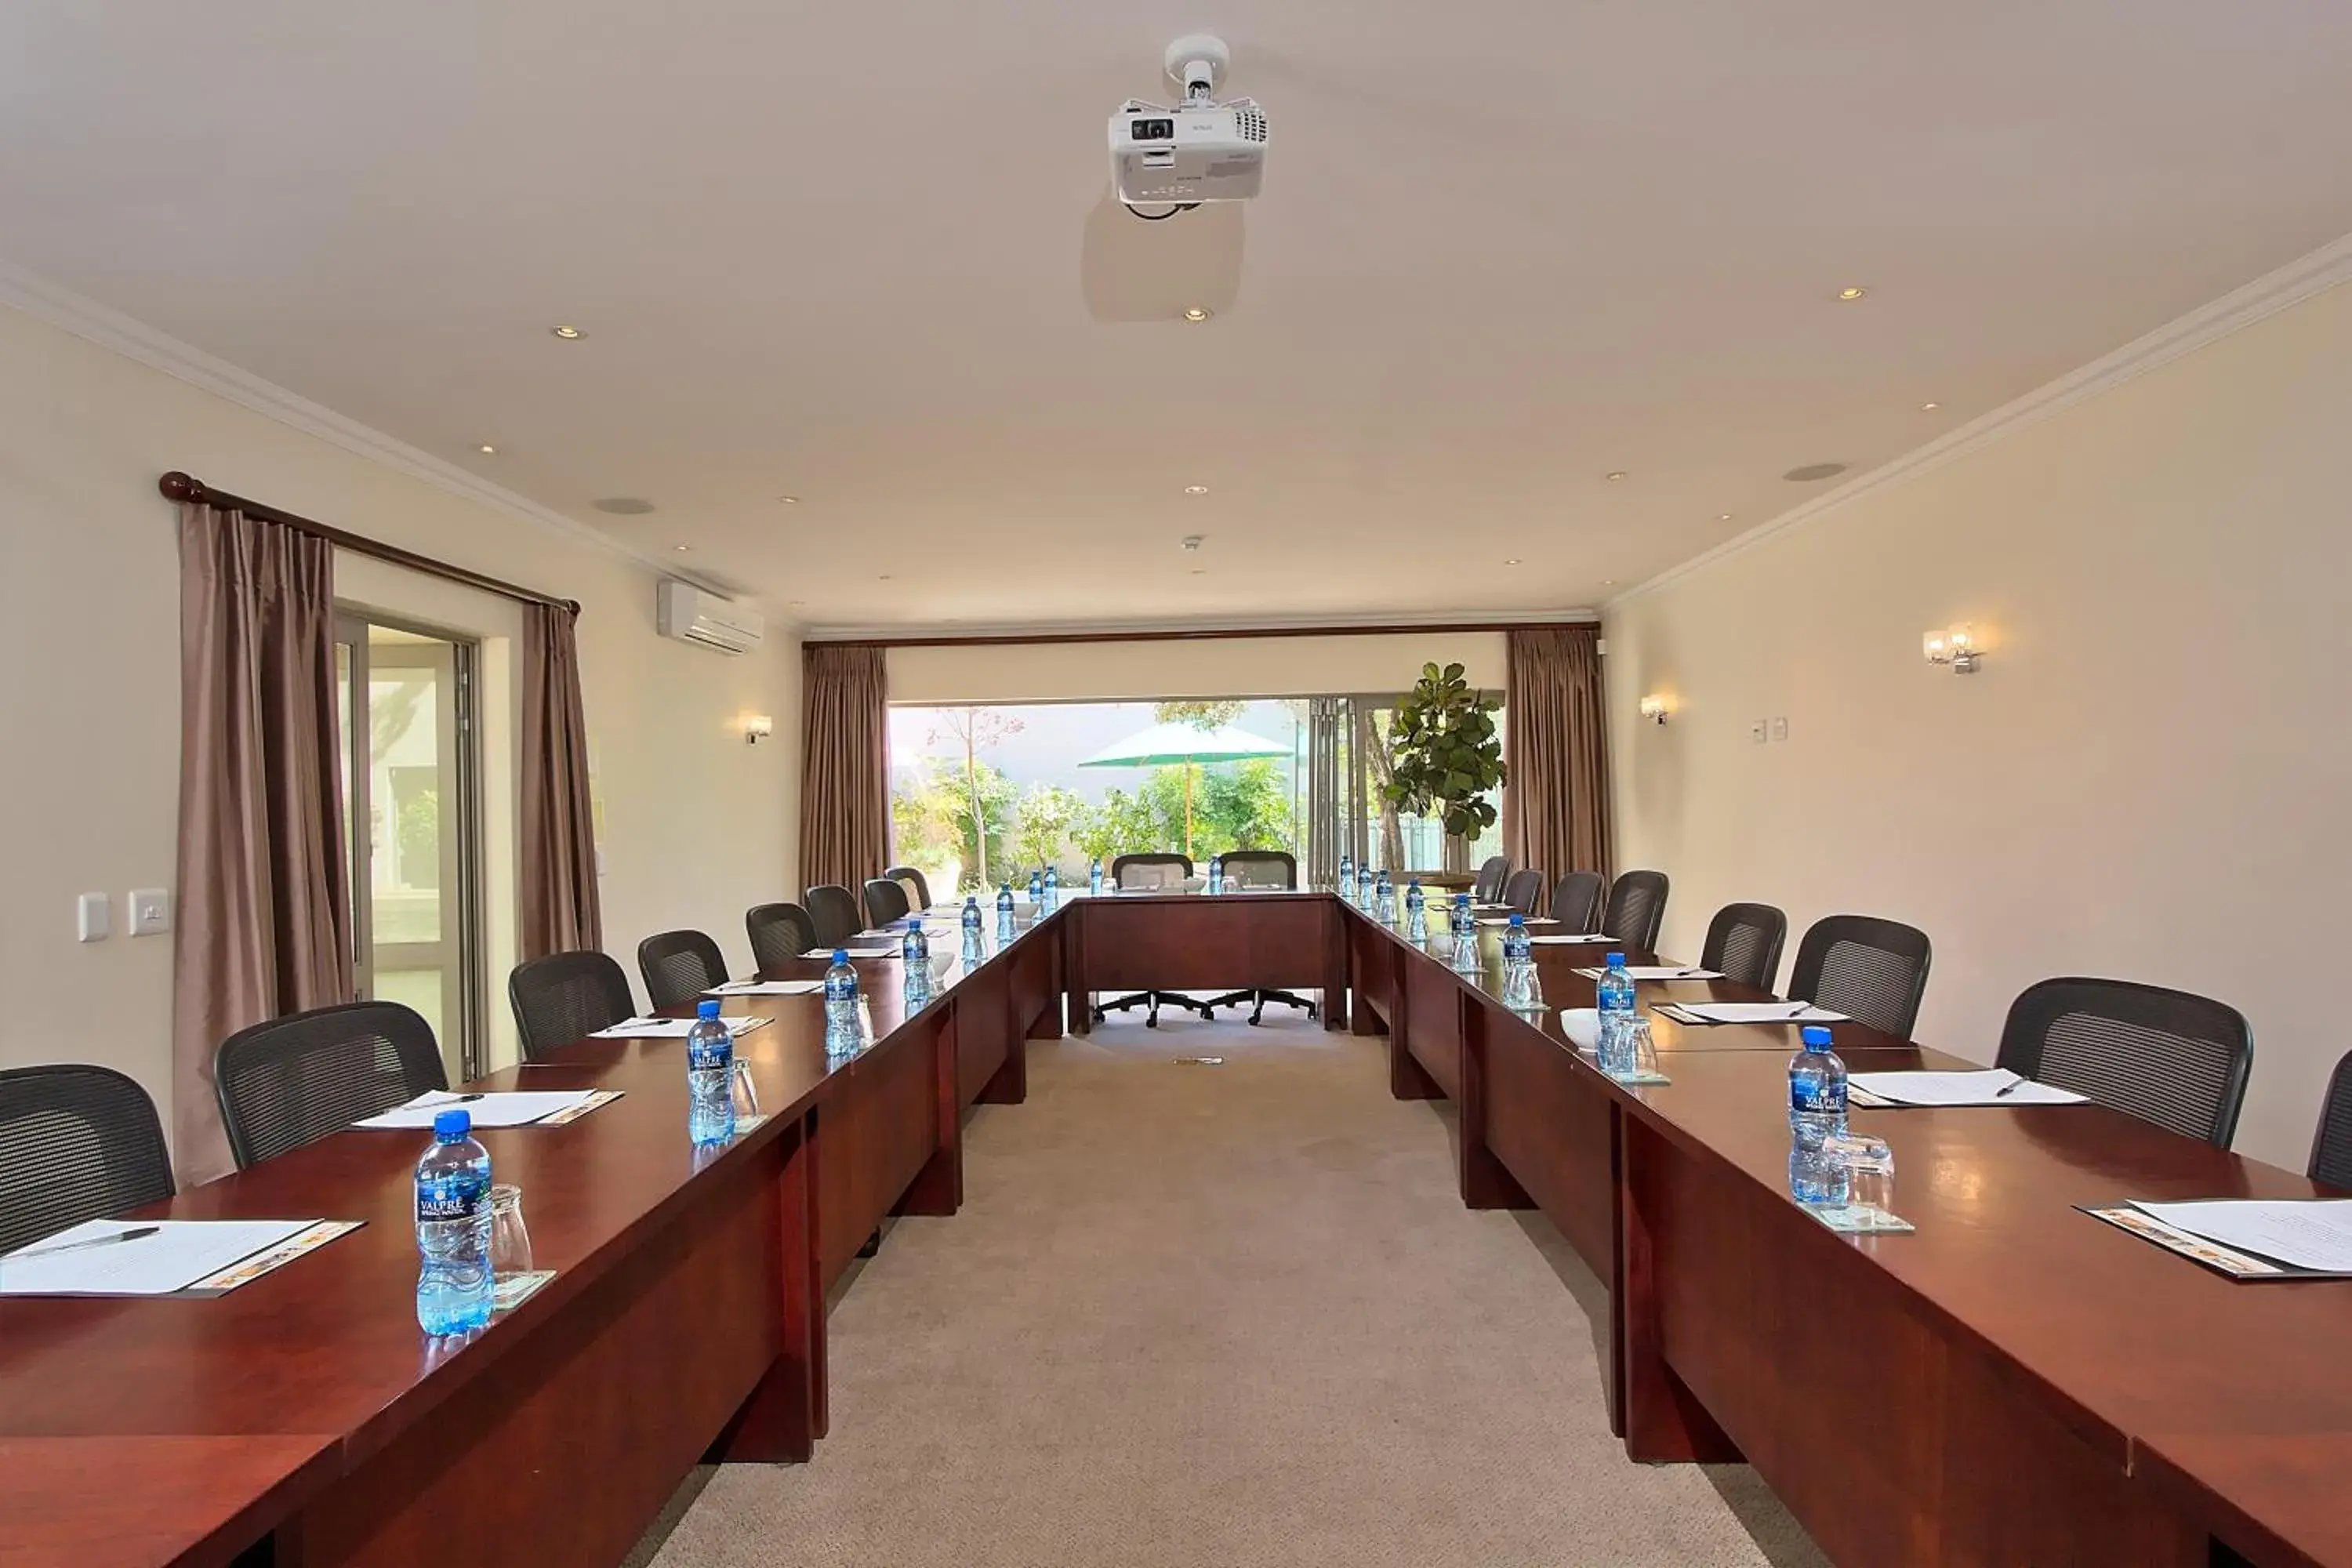 Meeting/conference room, Business Area/Conference Room in The Syrene Boutique Hotel